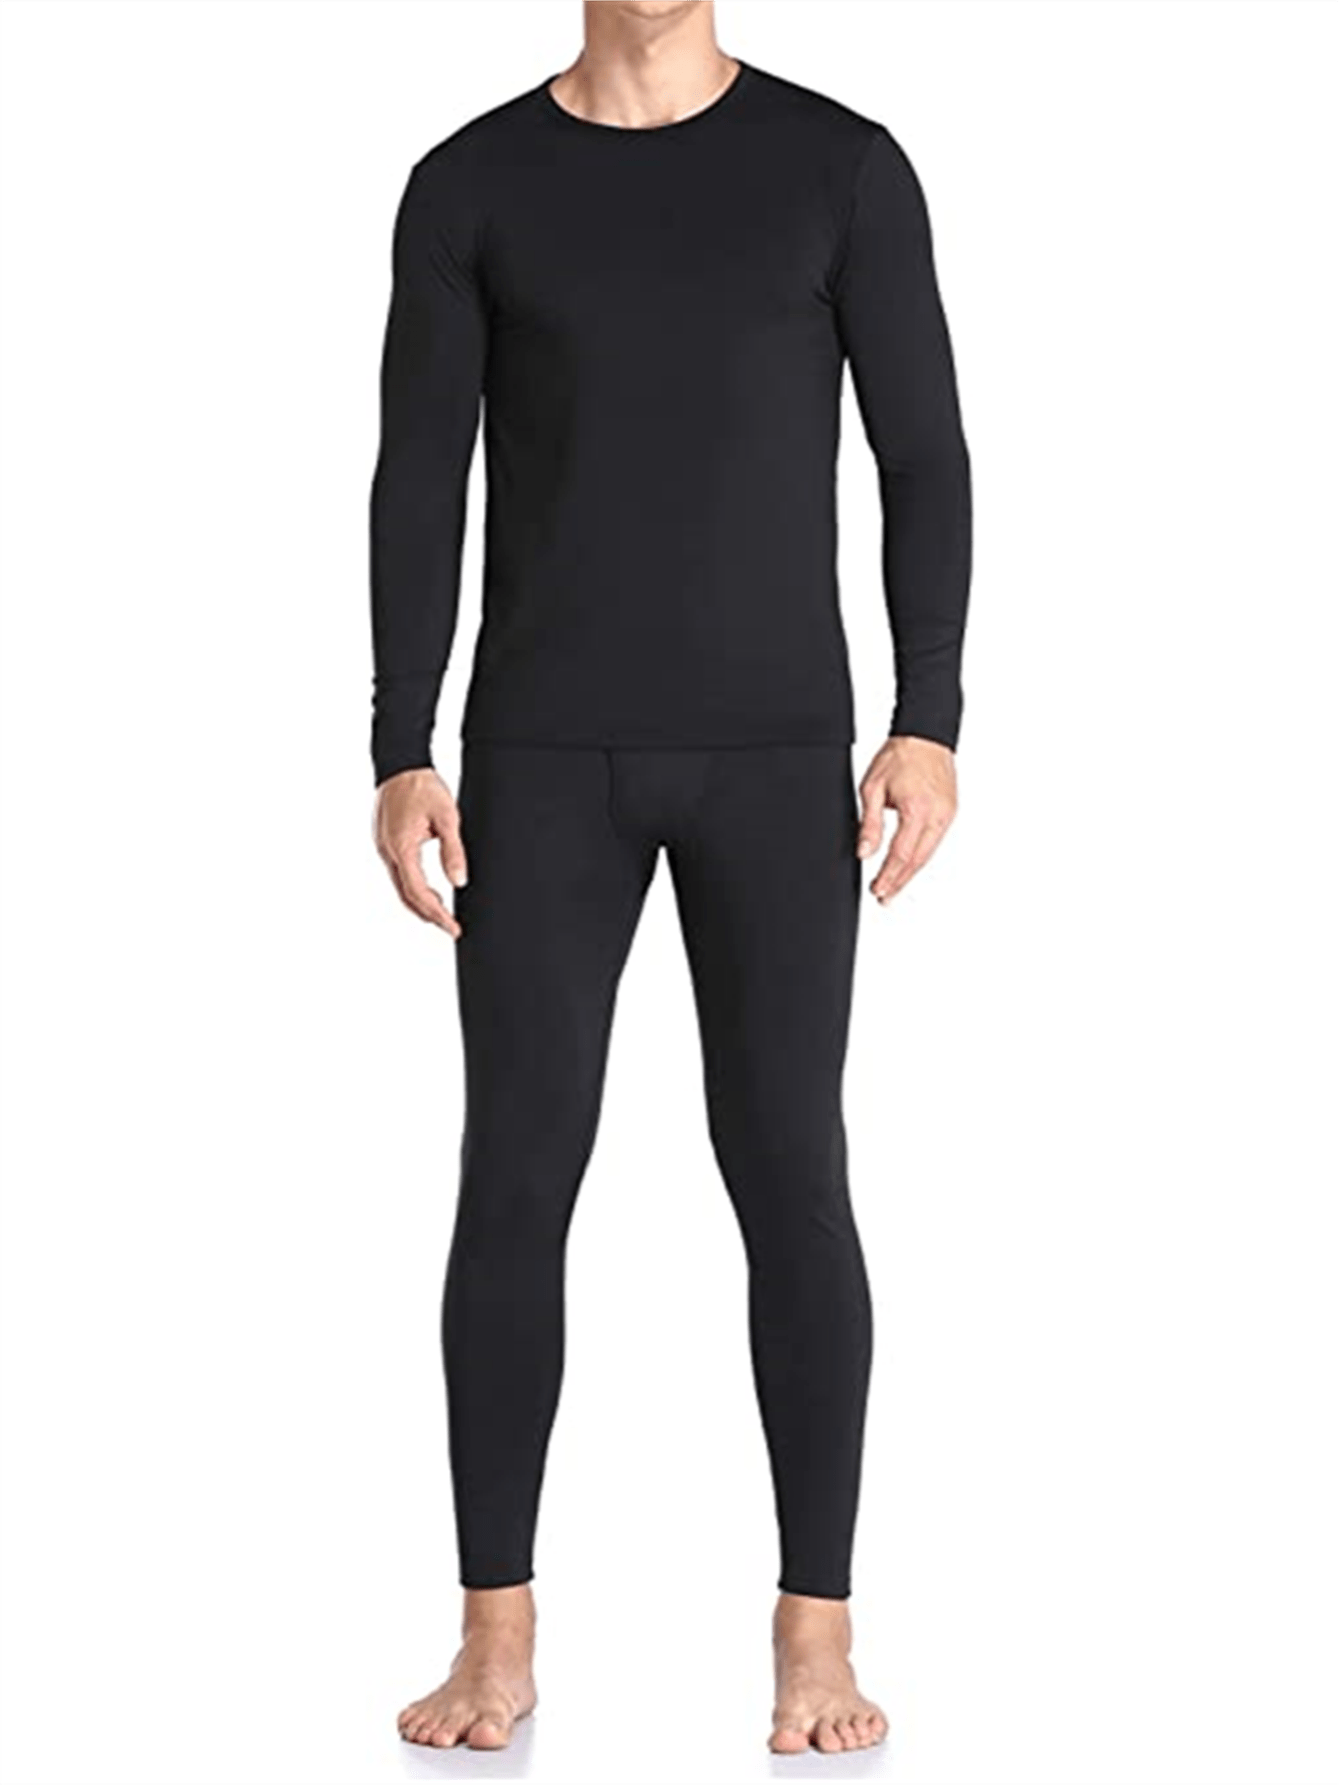 Ouruikia Men's Thermal Underwear Pants Thermal Bottoms Long Johns Bottoms  with Separate Pouch(Black,S) at  Men's Clothing store